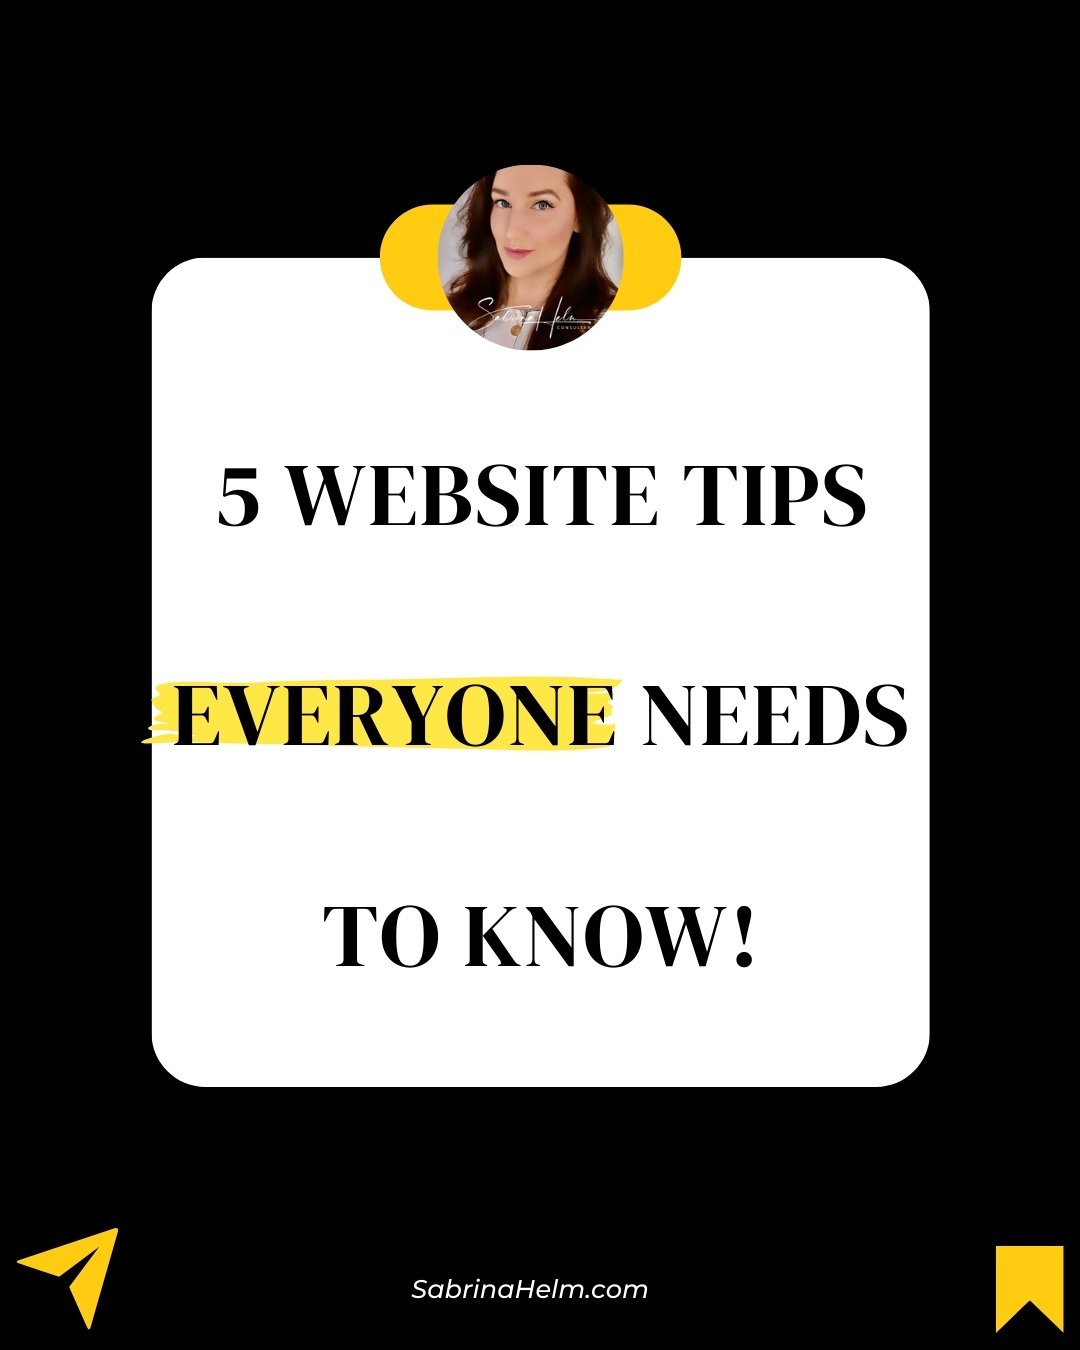 Your website is often the first stop for voters sizing up their choices. Is yours ready to make a strong impression?